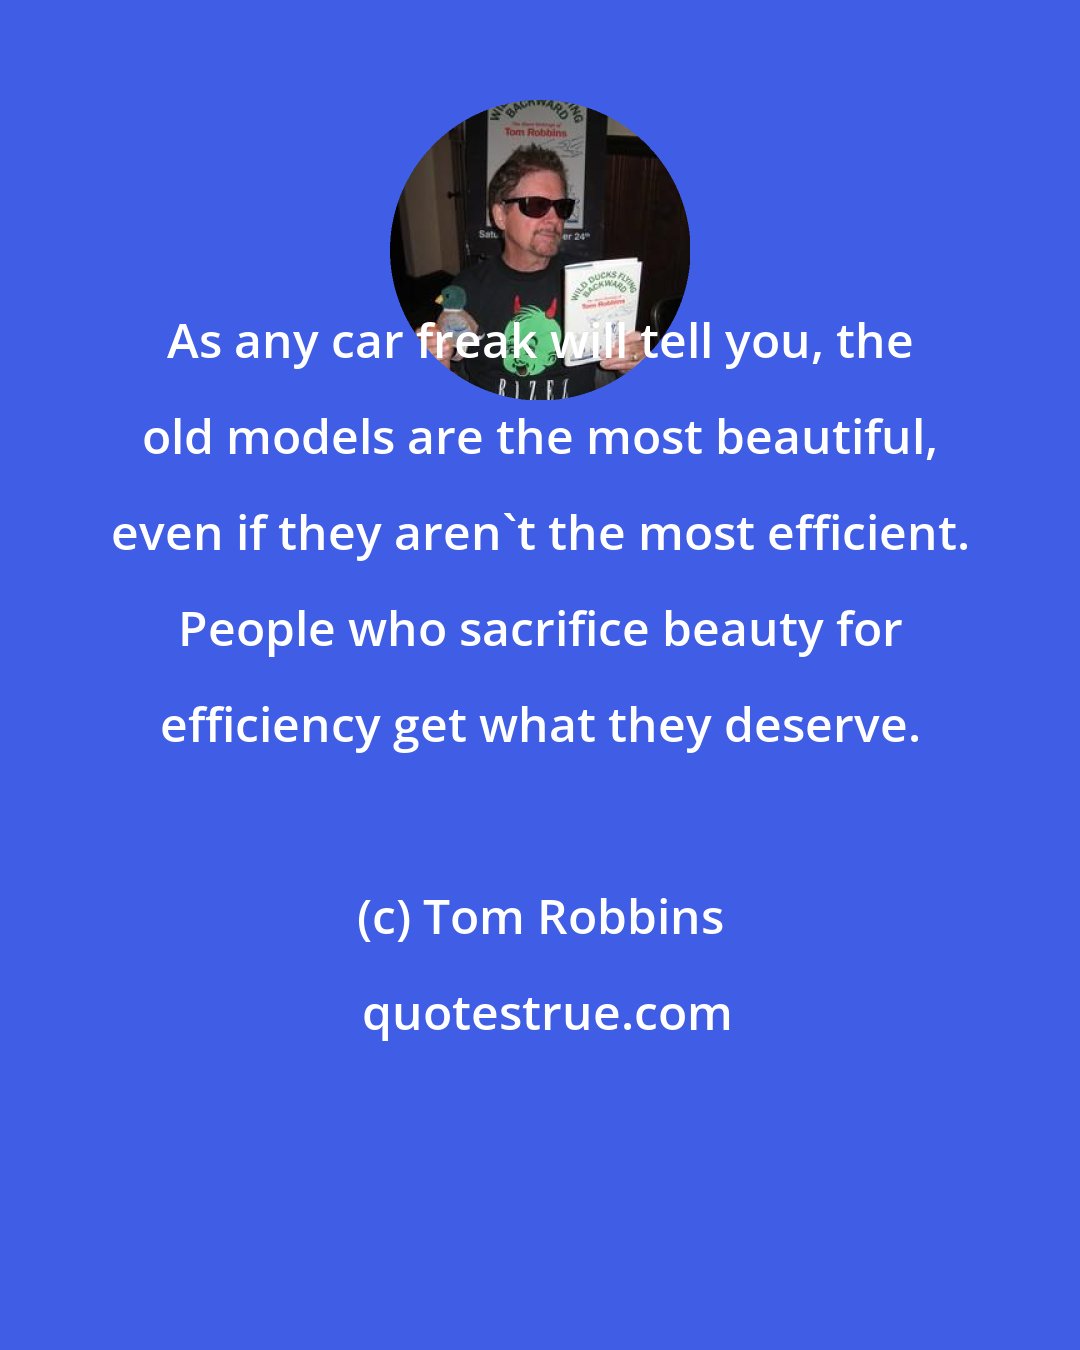 Tom Robbins: As any car freak will tell you, the old models are the most beautiful, even if they aren't the most efficient. People who sacrifice beauty for efficiency get what they deserve.